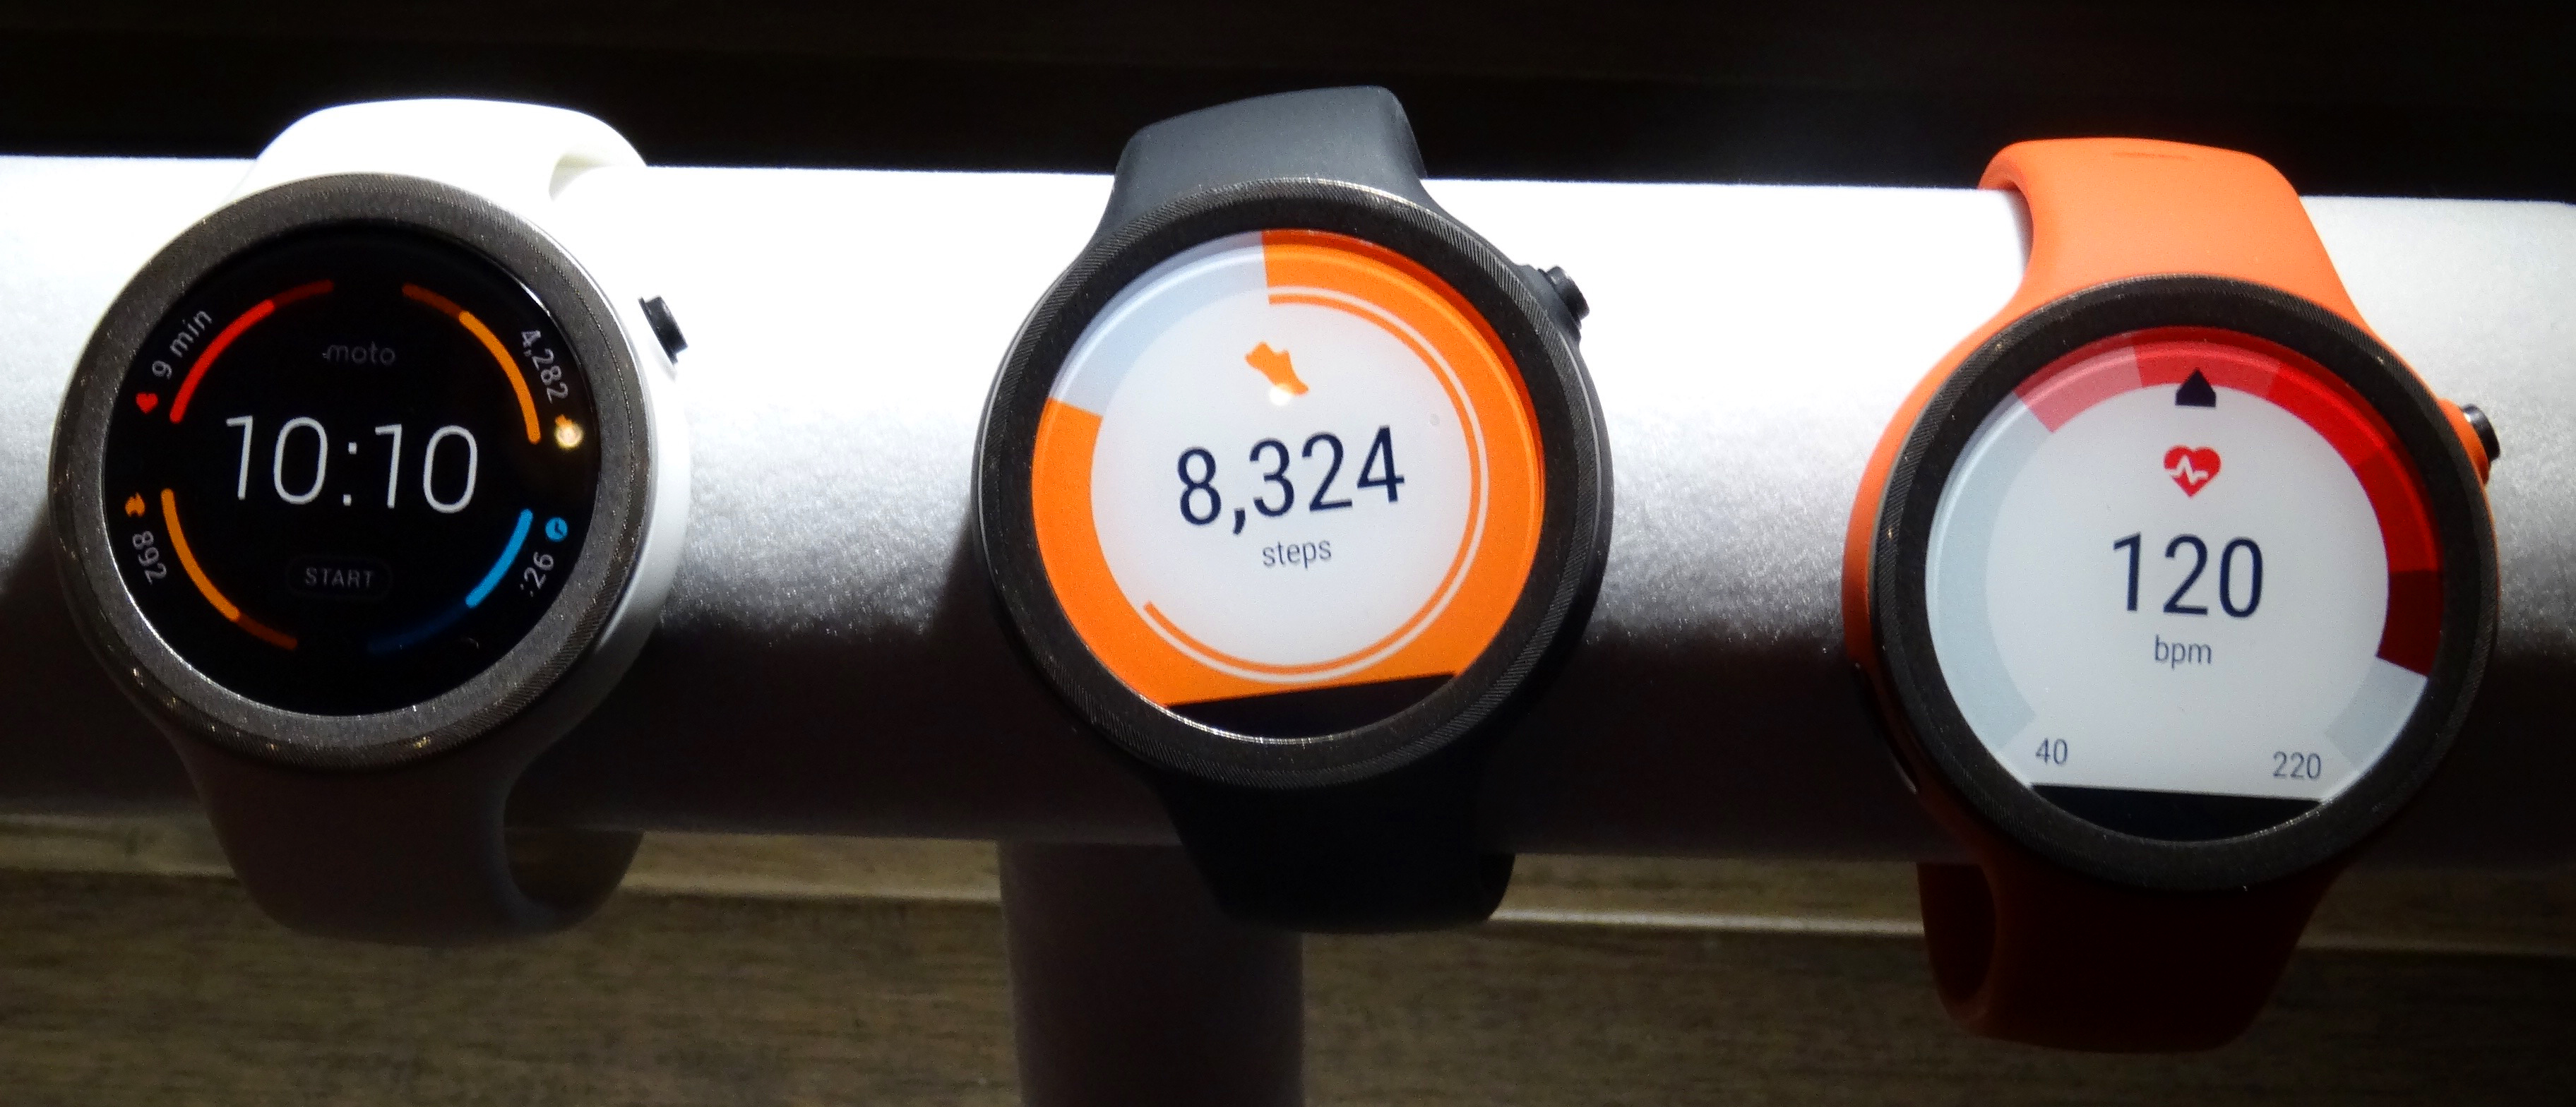 The smartwatch can be bought from Flipkart from Wednesday